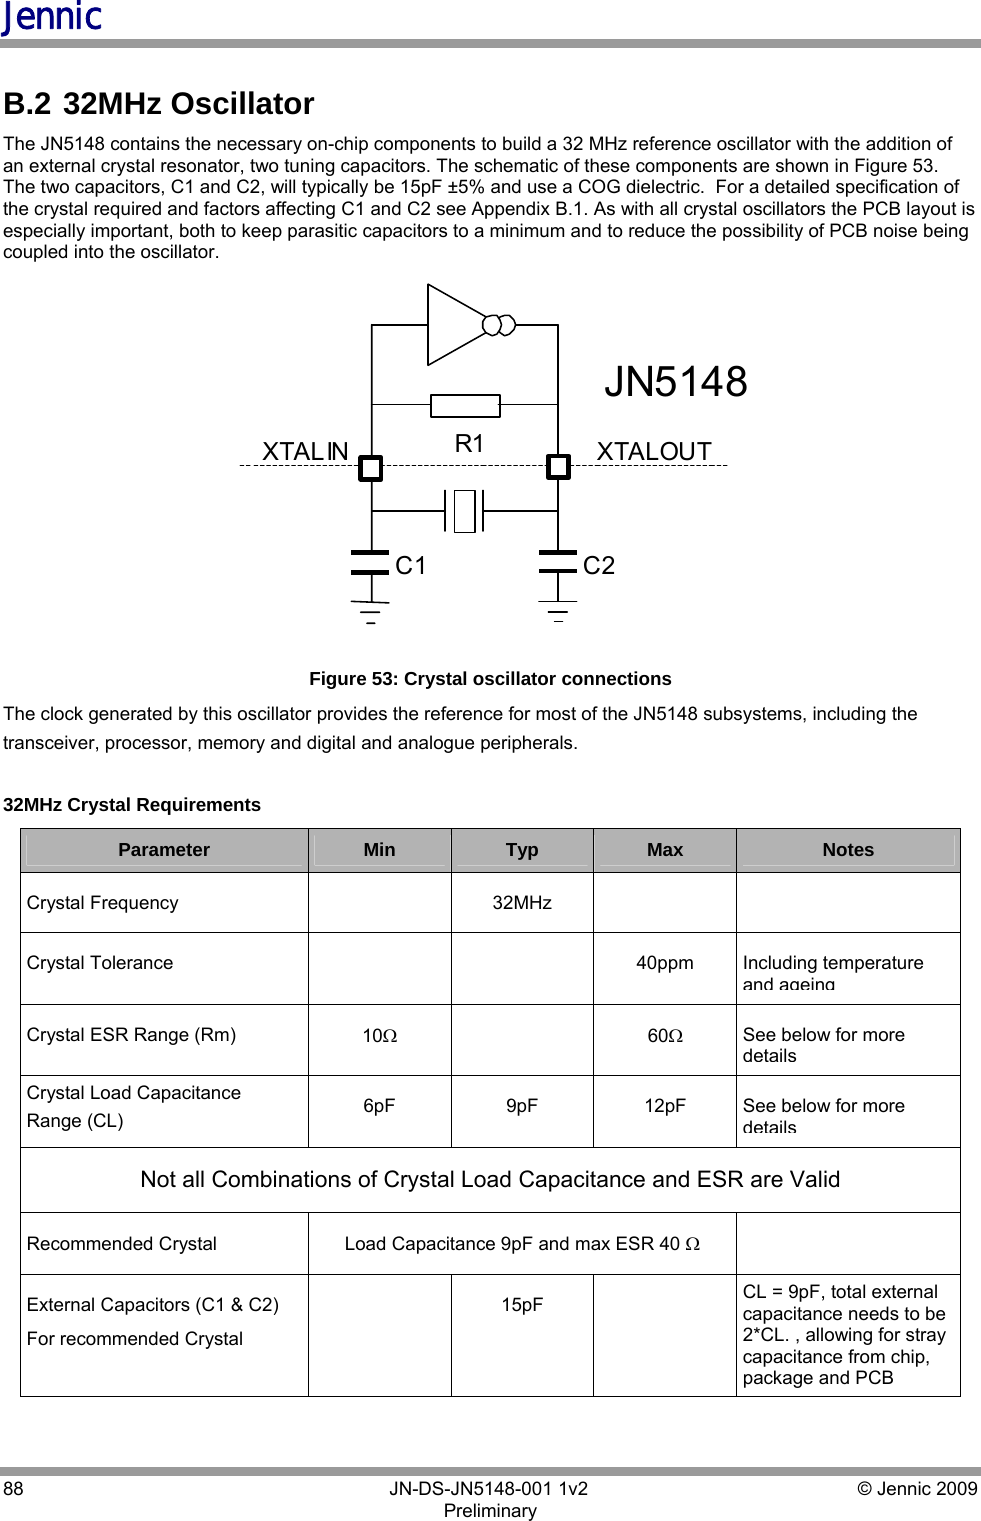 Jennic 88        JN-DS-JN5148-001 1v2  © Jennic 2009 Preliminary   B.2  32MHz Oscillator The JN5148 contains the necessary on-chip components to build a 32 MHz reference oscillator with the addition of an external crystal resonator, two tuning capacitors. The schematic of these components are shown in Figure 53.  The two capacitors, C1 and C2, will typically be 15pF ±5% and use a COG dielectric.  For a detailed specification of the crystal required and factors affecting C1 and C2 see Appendix B.1. As with all crystal oscillators the PCB layout is especially important, both to keep parasitic capacitors to a minimum and to reduce the possibility of PCB noise being coupled into the oscillator. XTALOUT C2 C1 R1 XTALIN JN5148  Figure 53: Crystal oscillator connections The clock generated by this oscillator provides the reference for most of the JN5148 subsystems, including the transceiver, processor, memory and digital and analogue peripherals.    32MHz Crystal Requirements Parameter  Min  Typ  Max  Notes Crystal Frequency    32MHz     Crystal Tolerance      40ppm  Including temperature and ageingCrystal ESR Range (Rm)  10Ω  60Ω See below for more detailsCrystal Load Capacitance  Range (CL)  6pF  9pF  12pF  See below for more detailsNot all Combinations of Crystal Load Capacitance and ESR are Valid  Recommended Crystal  Load Capacitance 9pF and max ESR 40 Ω  External Capacitors (C1 &amp; C2)  For recommended Crystal   15pF  CL = 9pF, total external capacitance needs to be 2*CL. , allowing for stray capacitance from chip, package and PCB  